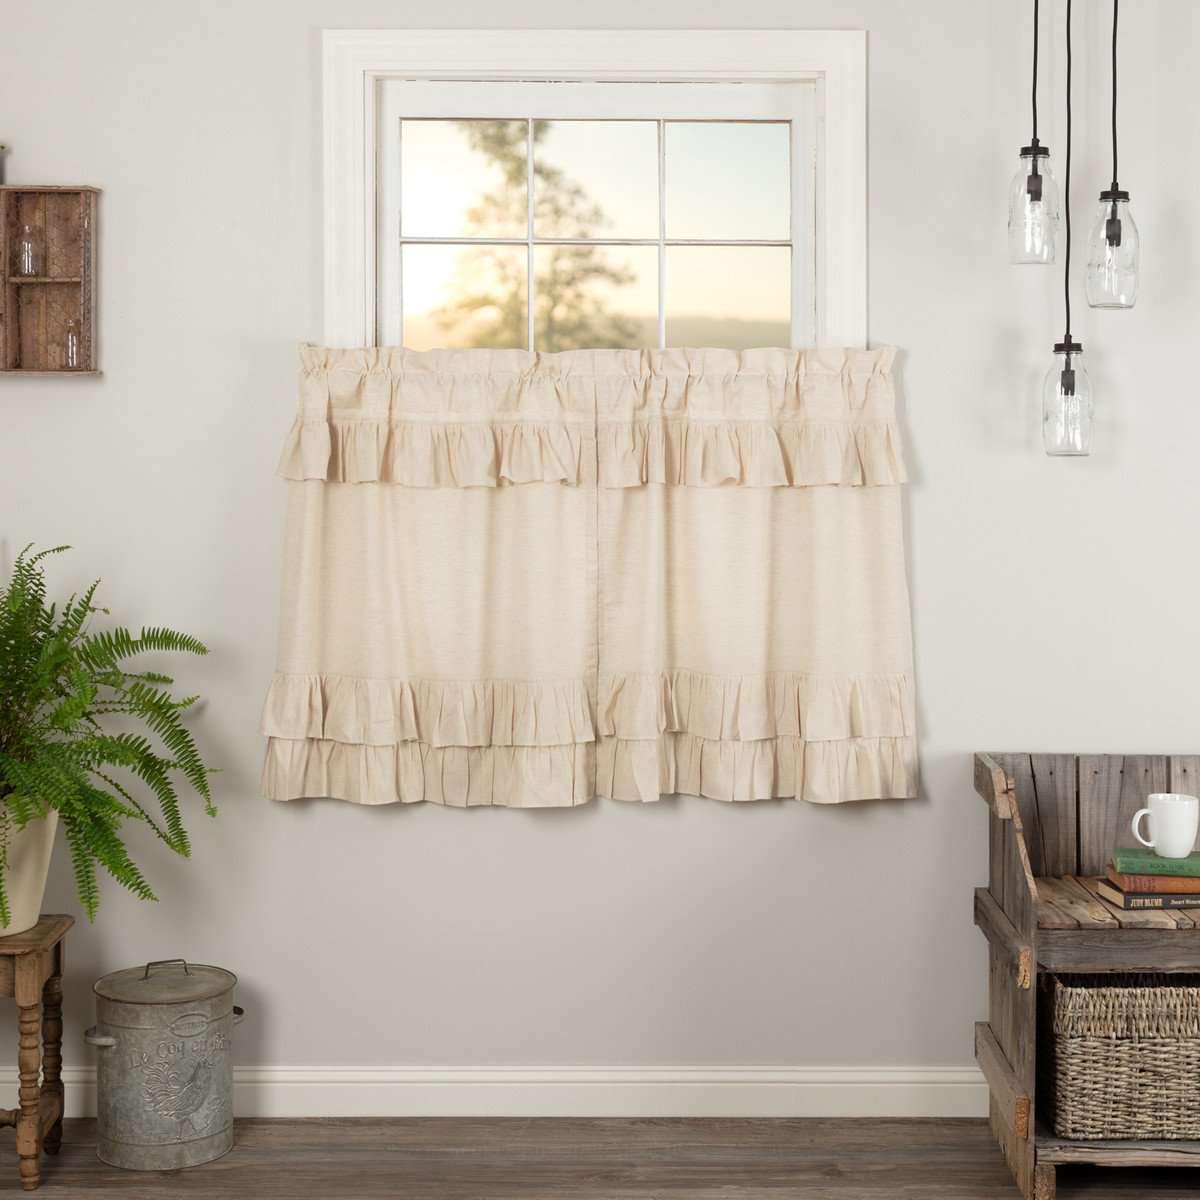 Simple Life Flax Natural Ruffled Tier Curtain Set of 2 L36xW36 VHC Brands - The Fox Decor